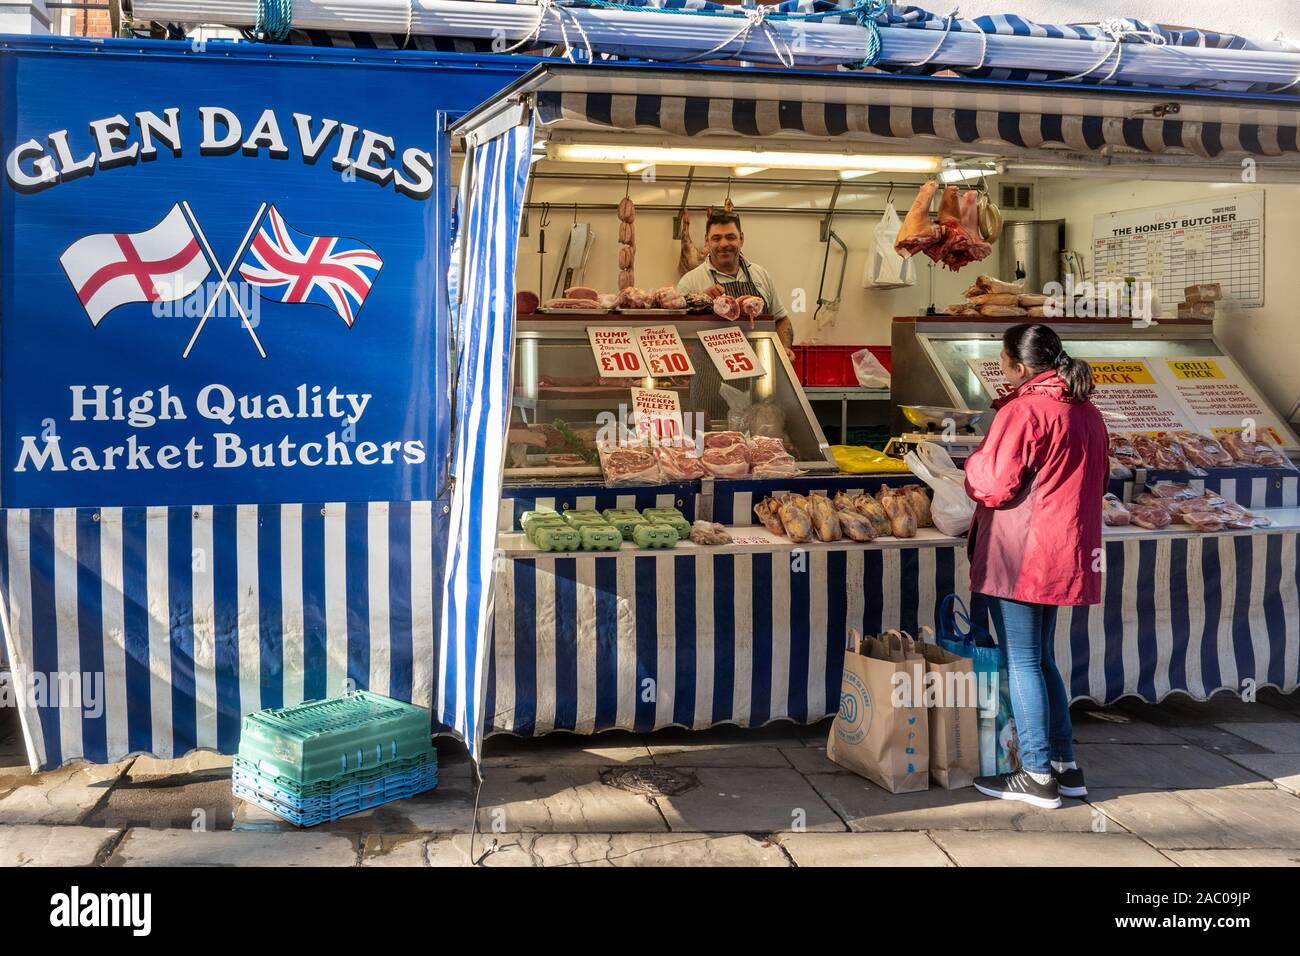 Glen Davies market stall, high quality market butcher selling meat and other produce, UK Stock Photo